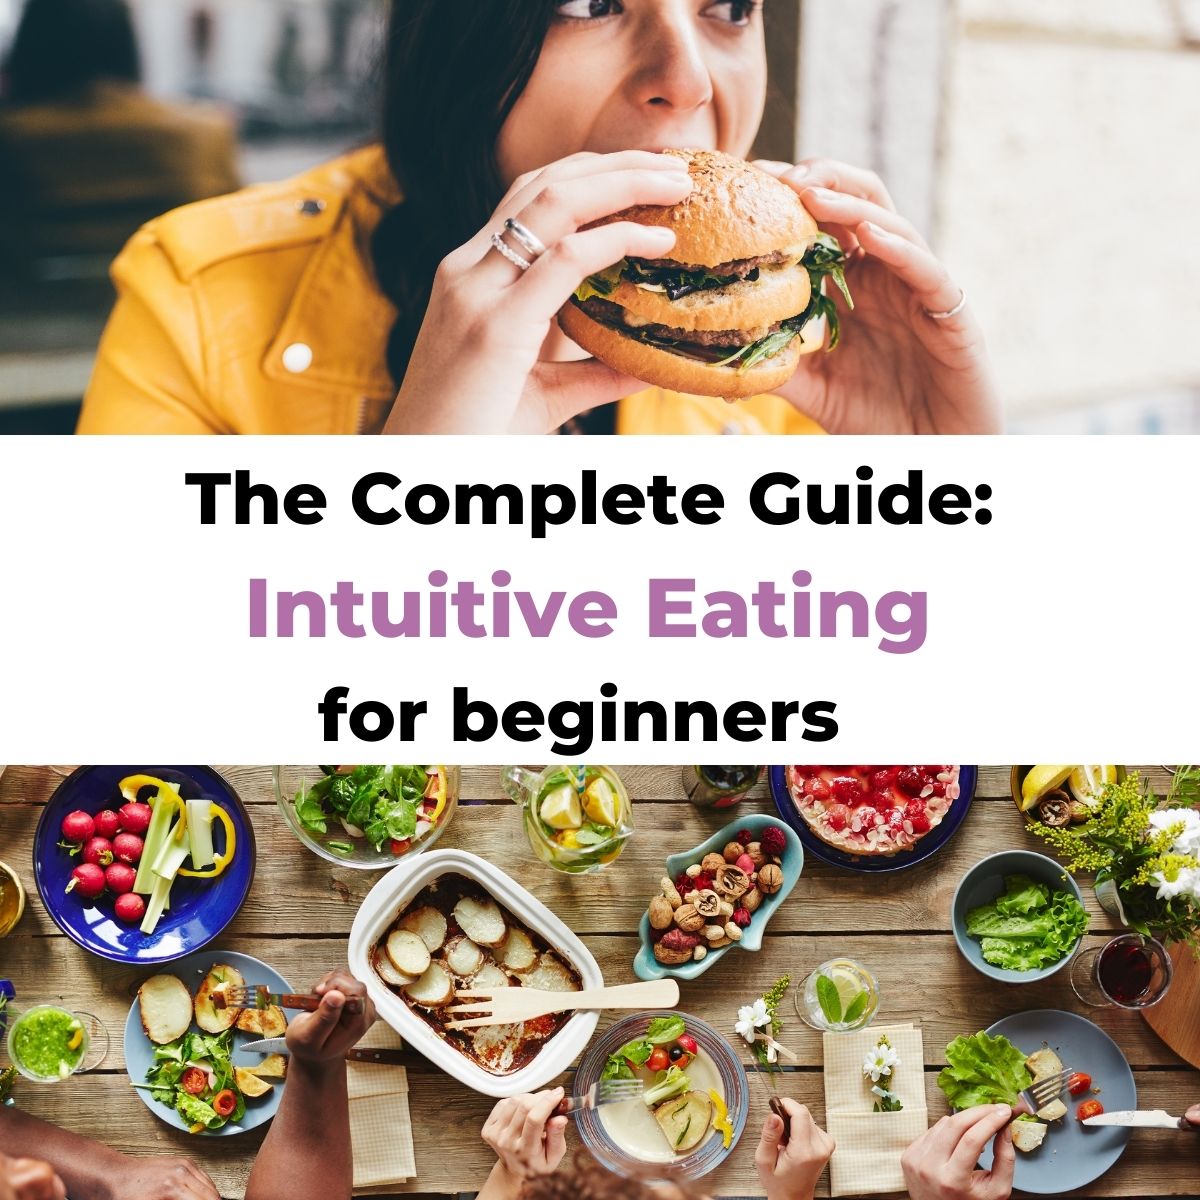 woman eating a burger on top/ The complete guide: intuitive eating for beginners/ table with several dishes of meat and salad laid out on it